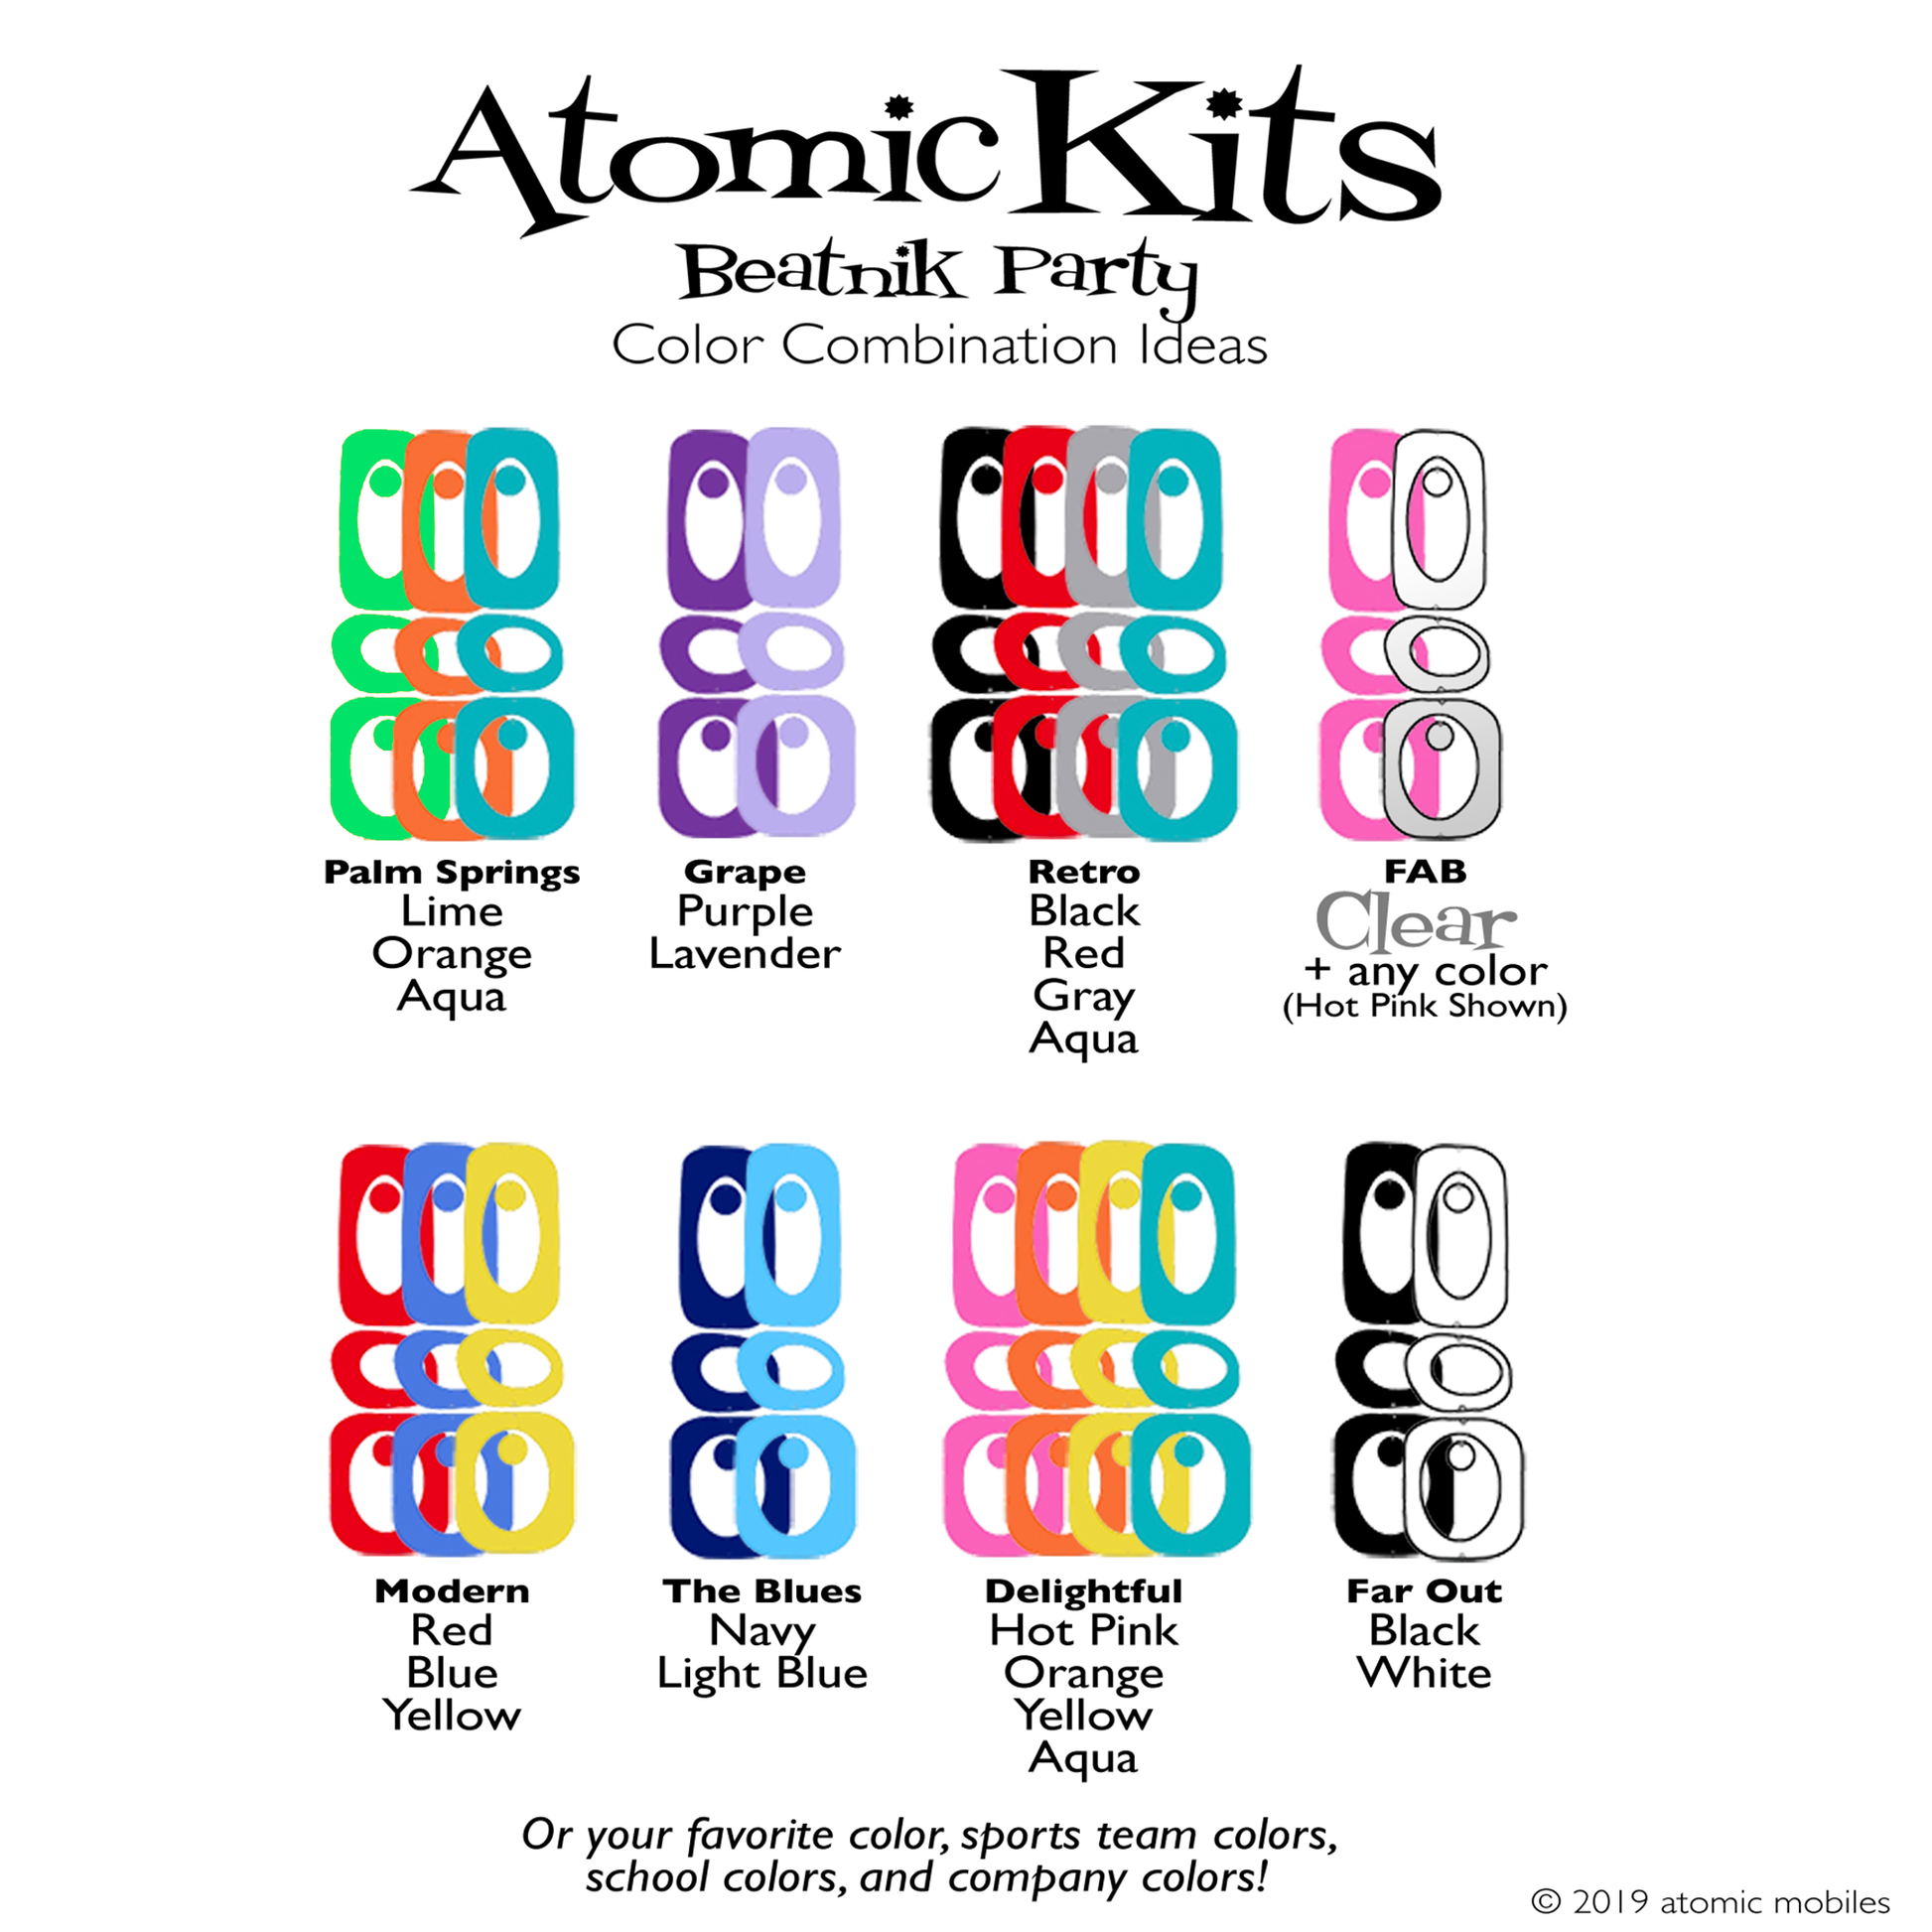 Beatnik Party Color Combination Idea Chart for Atomic Kits by AtomicMobiles.com